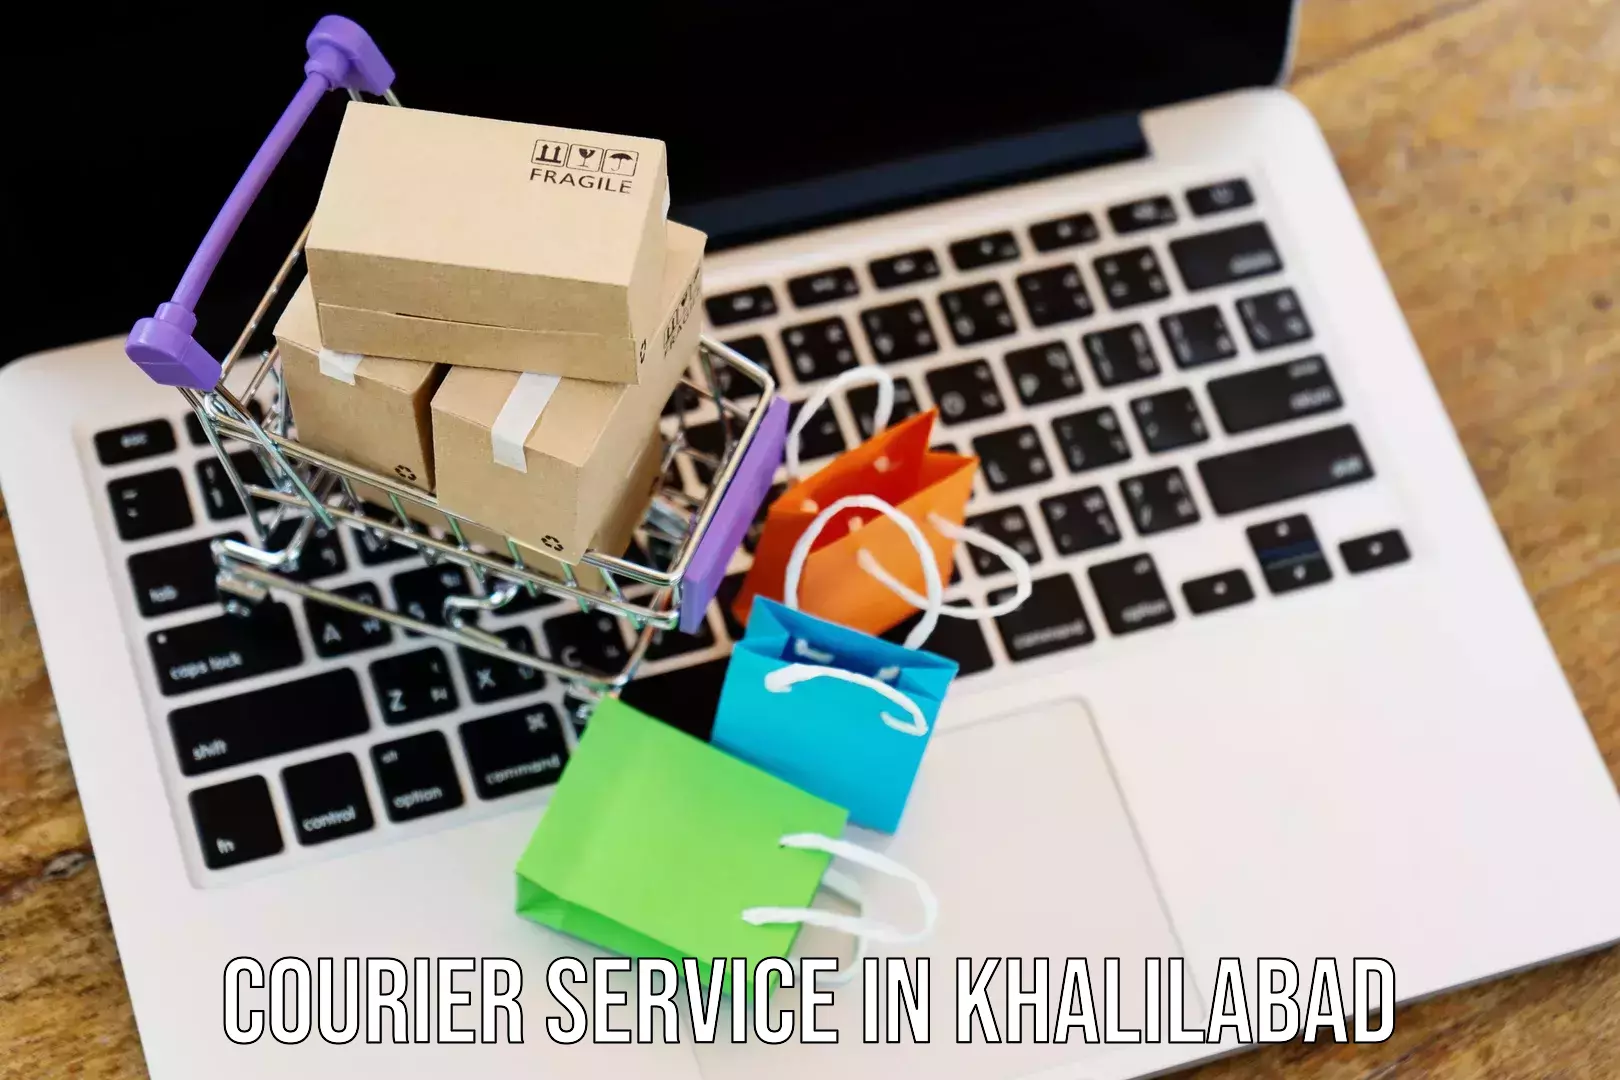 Expedited shipping methods in Khalilabad